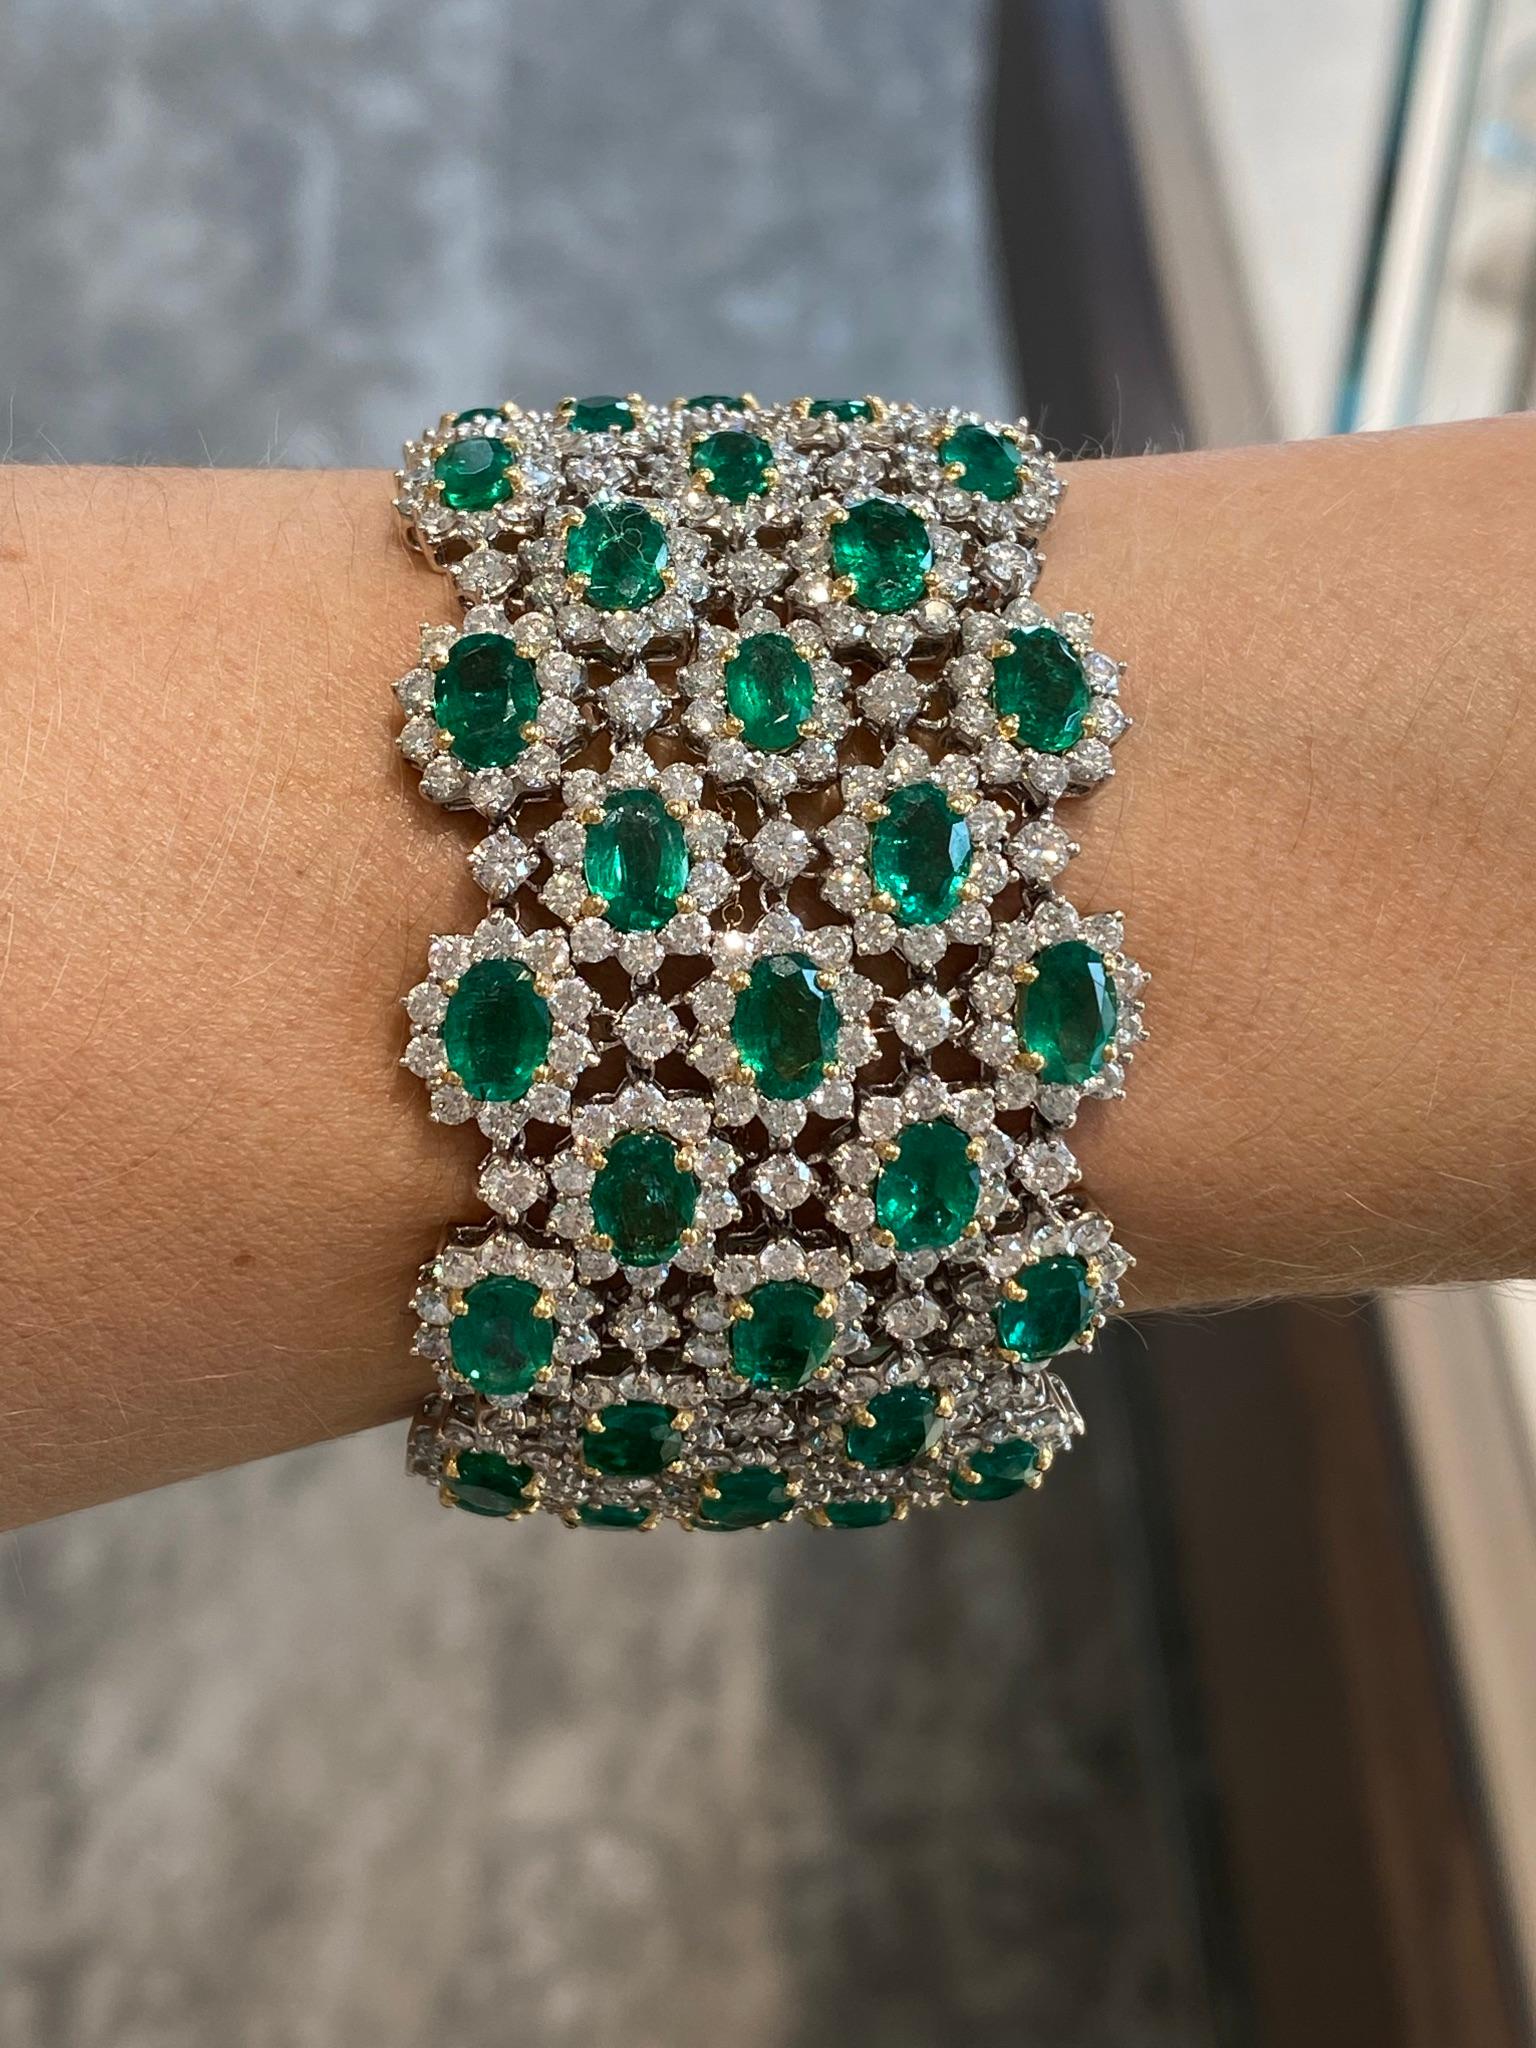 Contemporary 41.47 Carats Emerald and Diamond Bracelet in 18KT White Gold For Sale